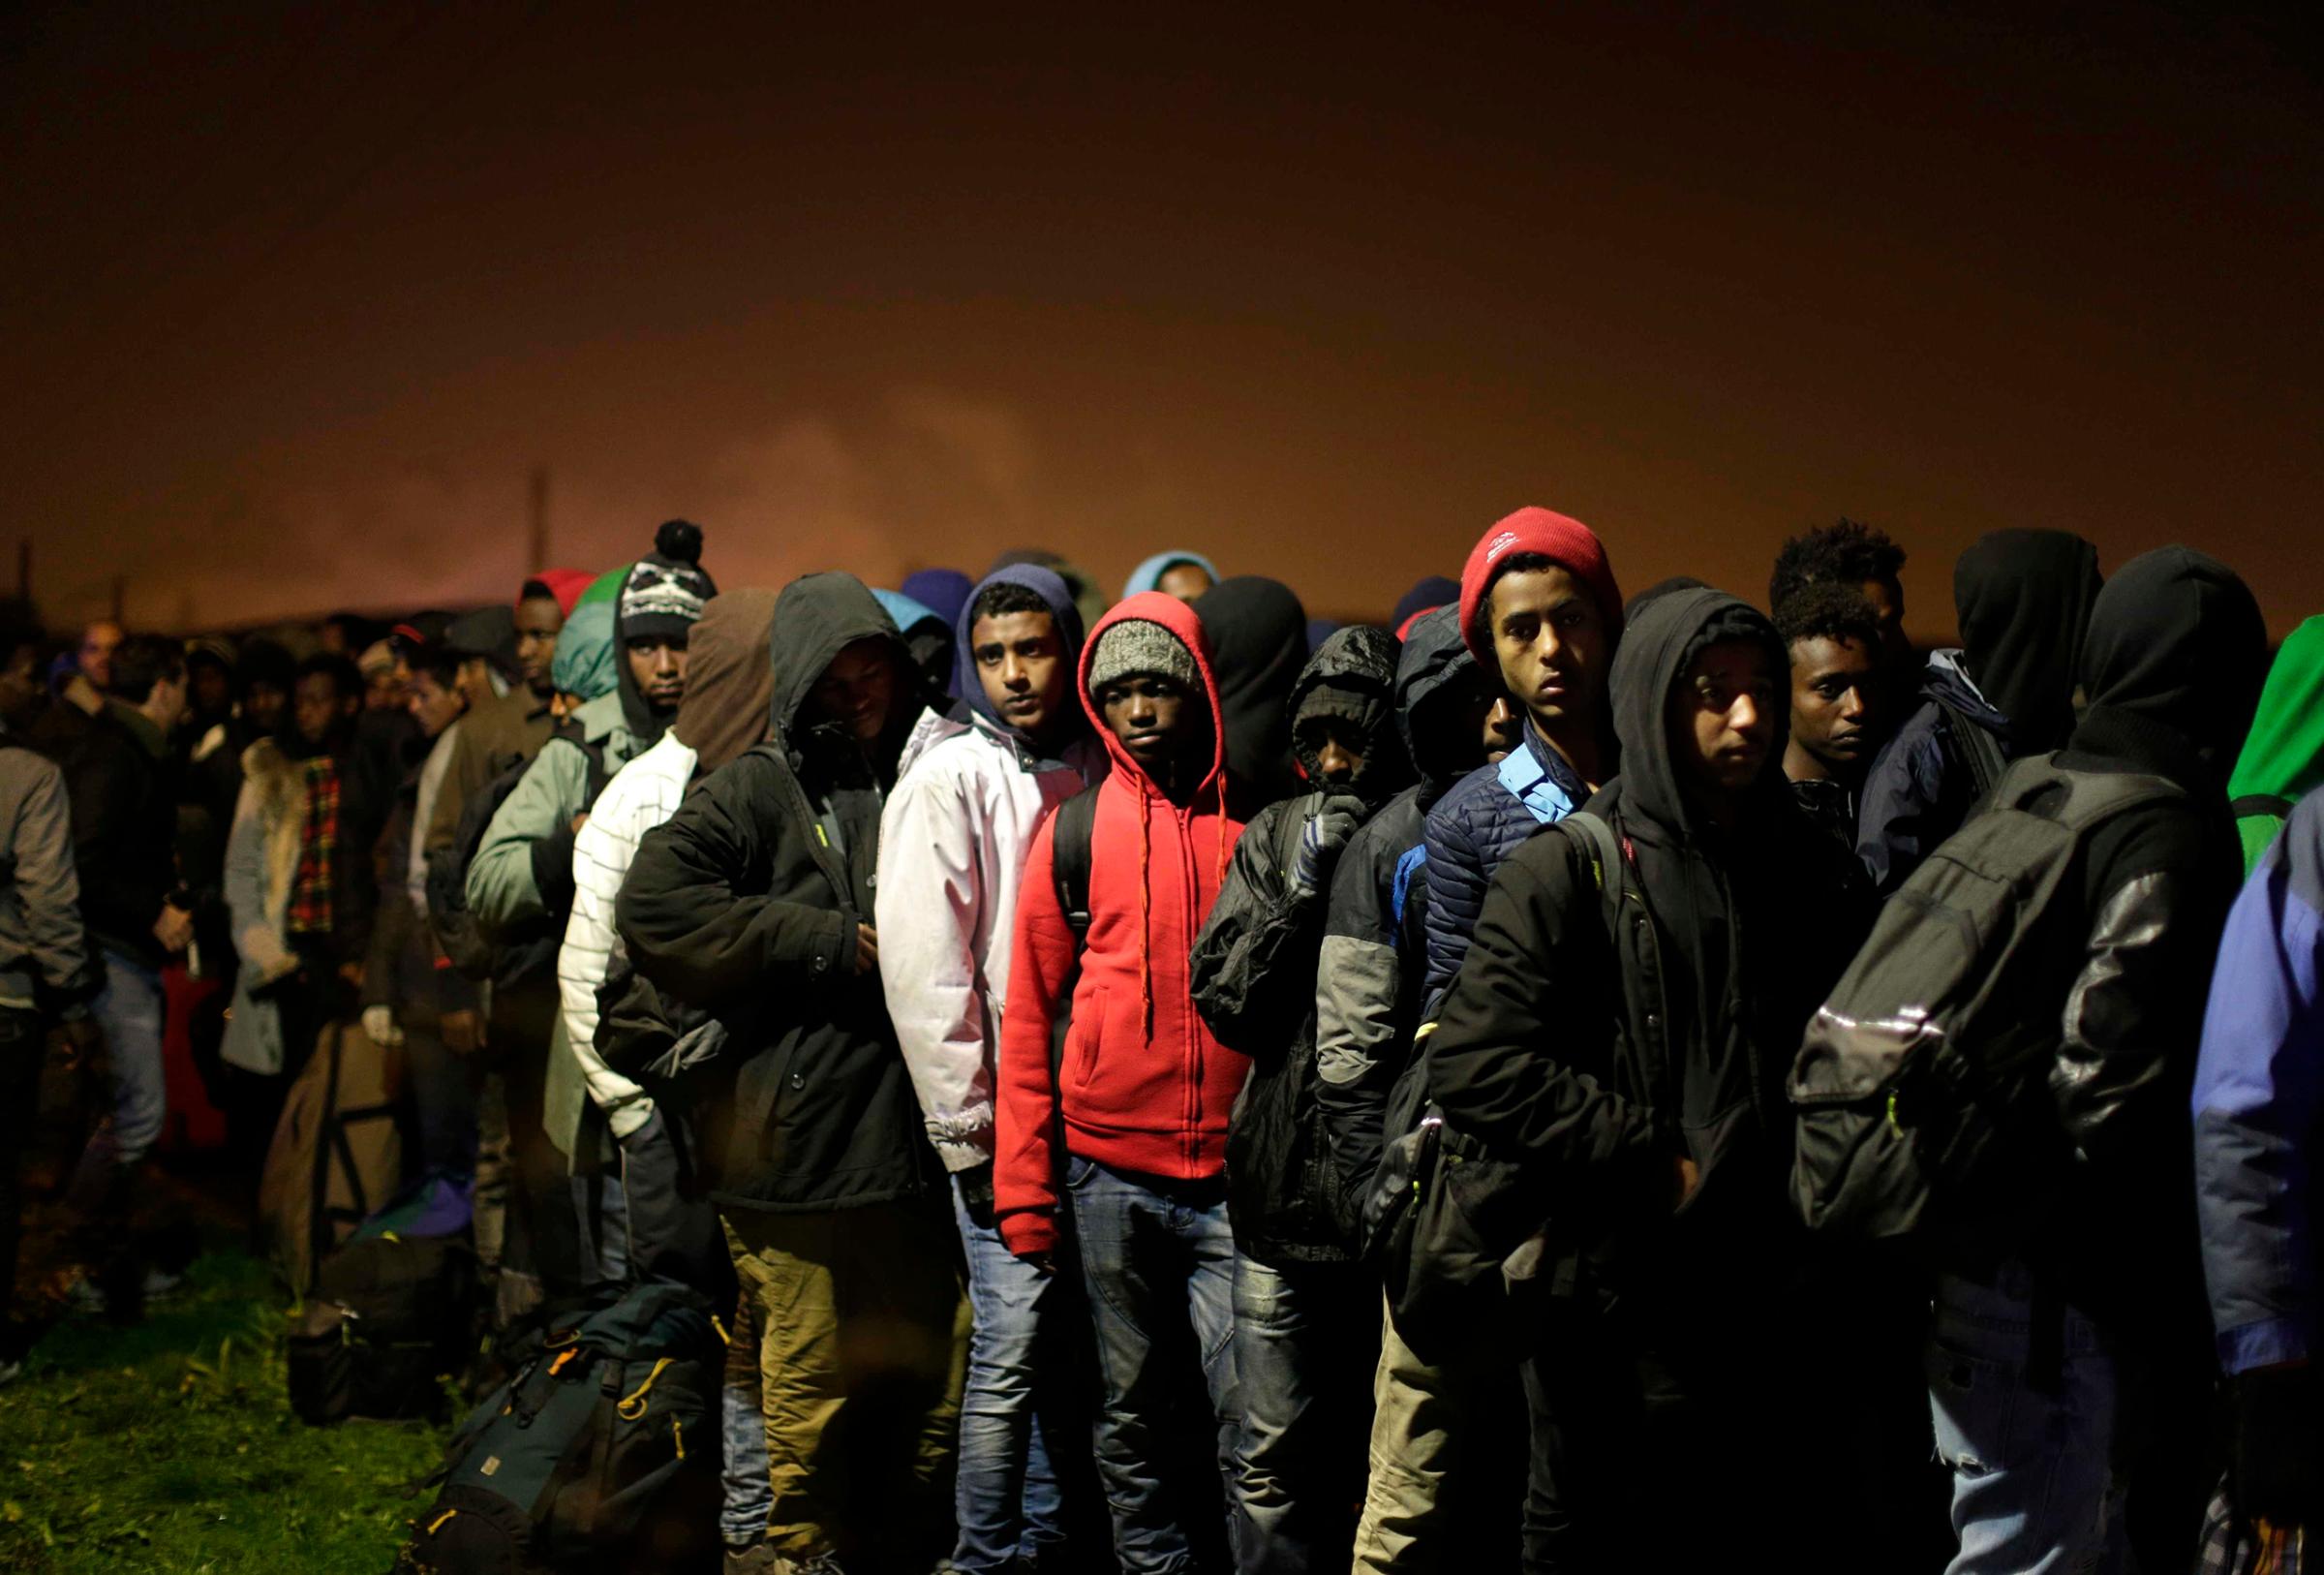 Migrants line up to register at a processing center in the makeshift migrant camp known as "the Jungle," near Calais, northern France, on Oct. 24, 2016.